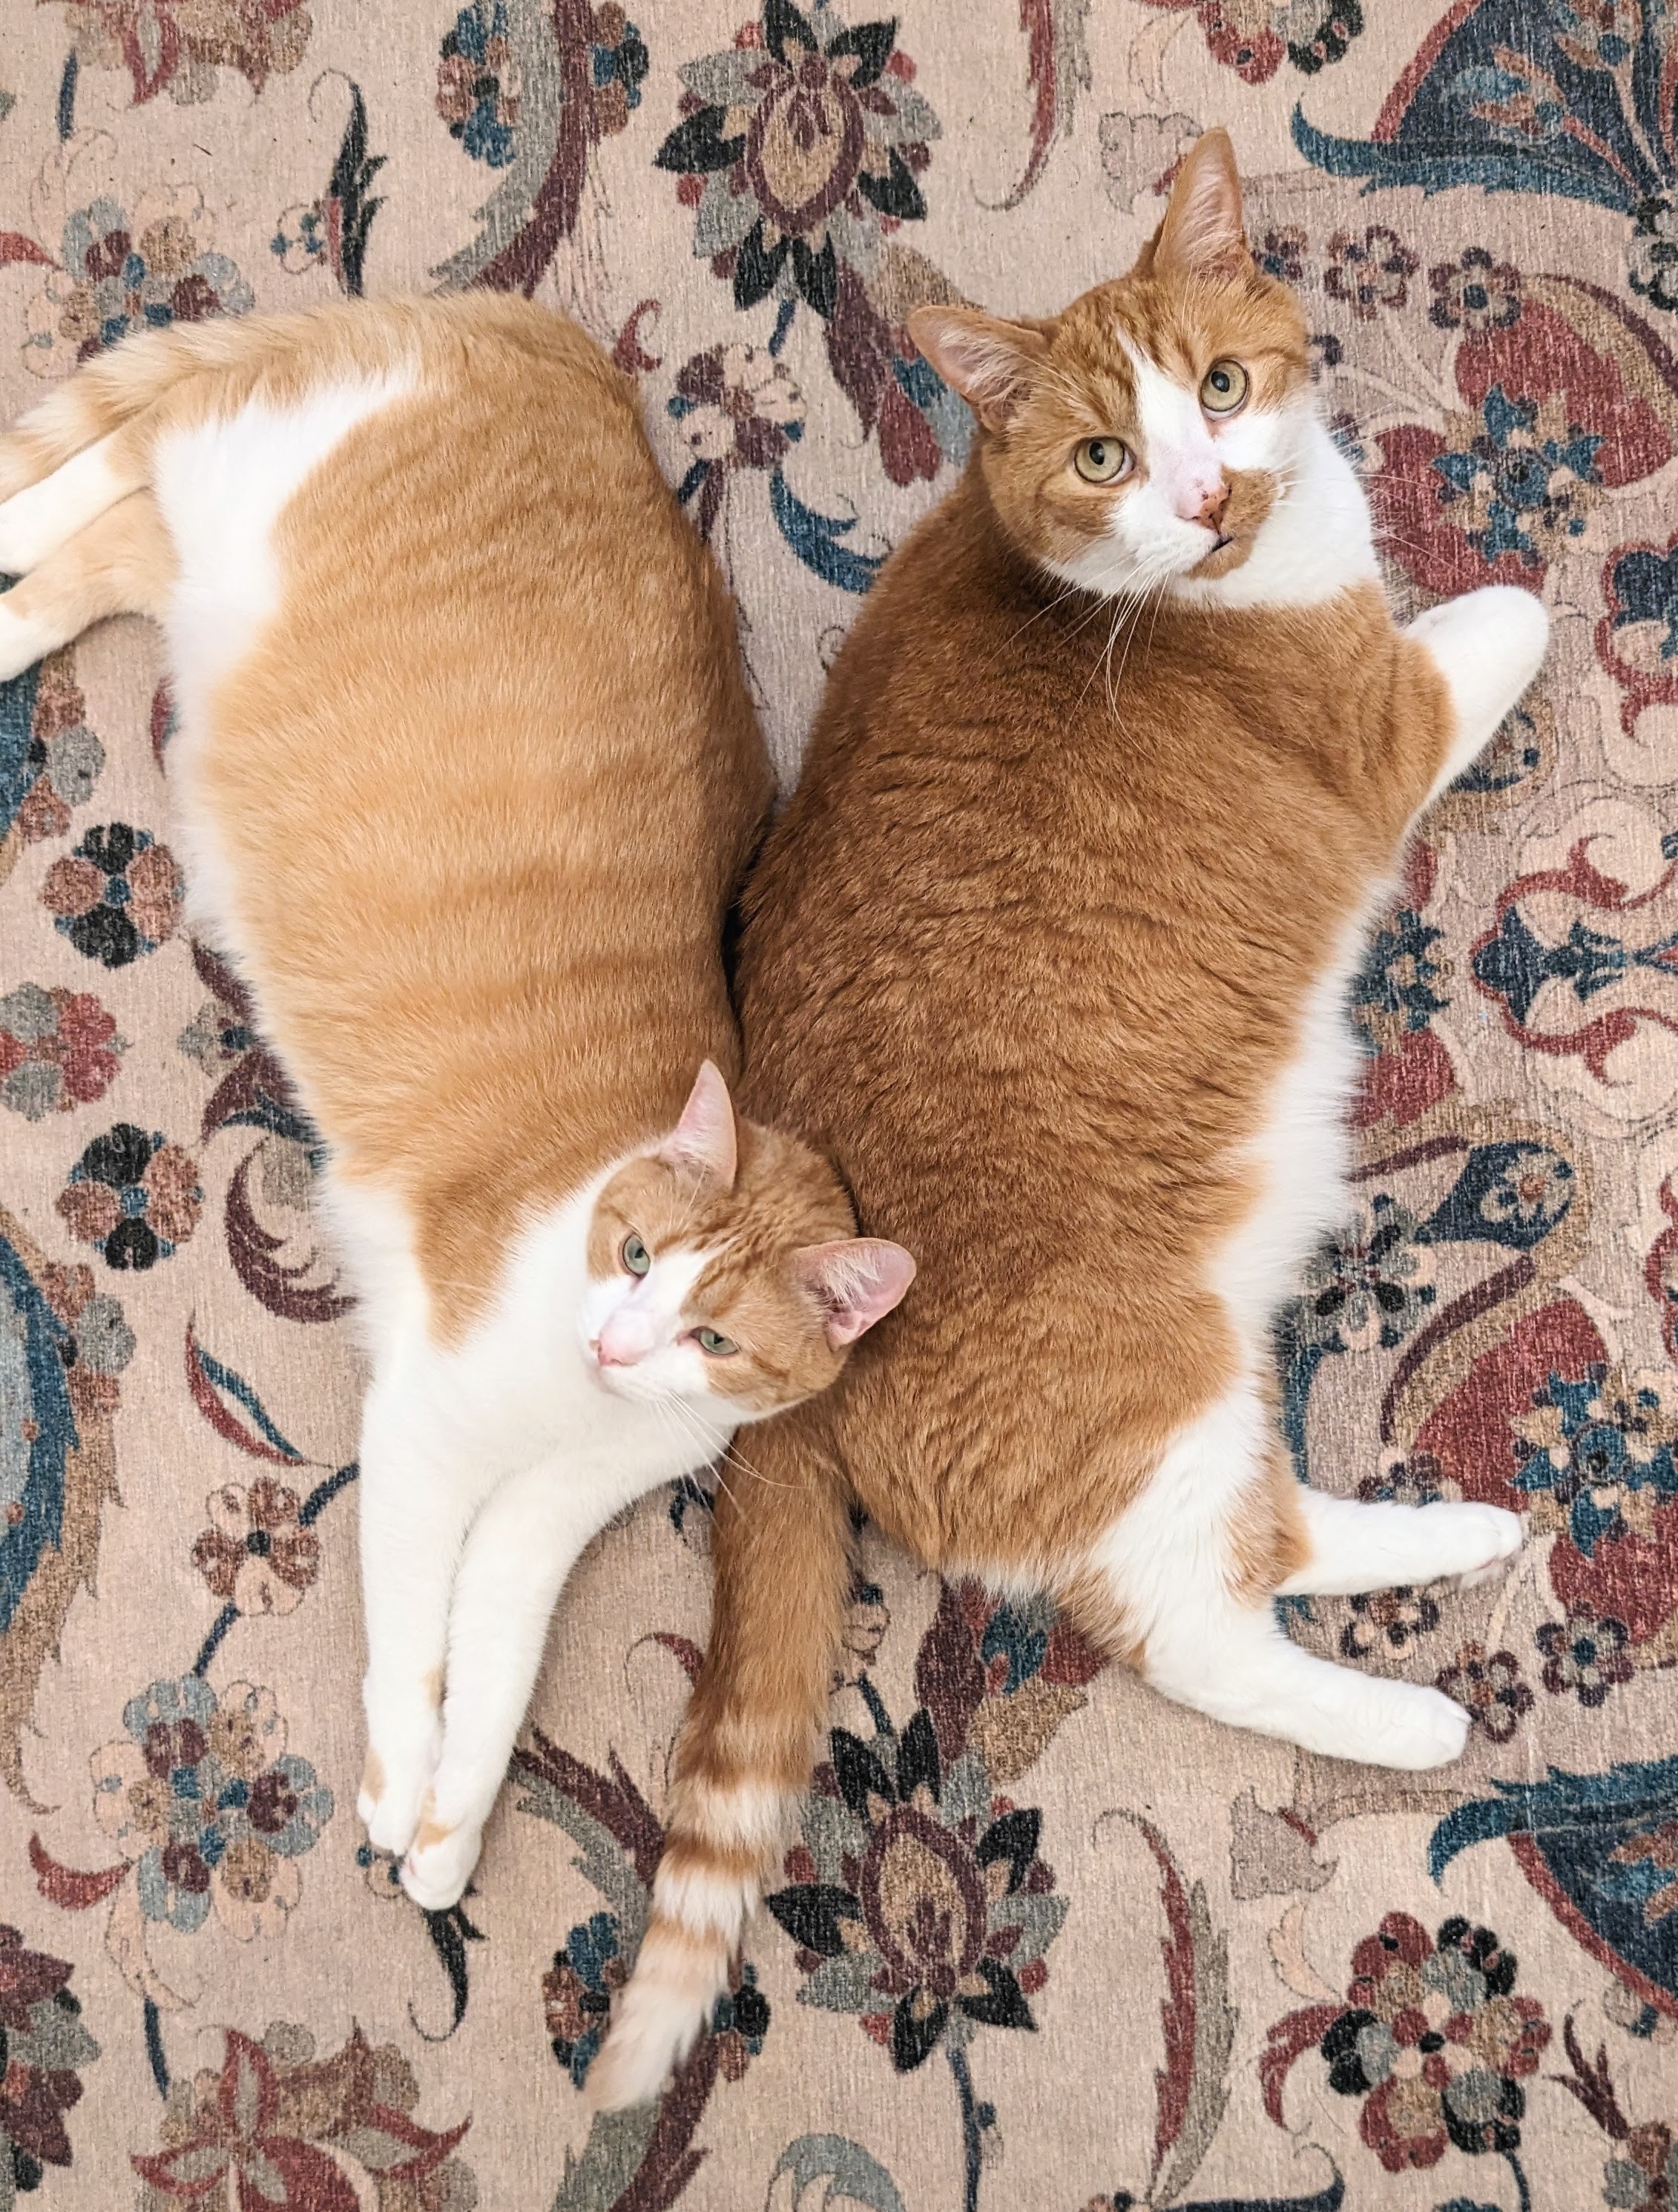 Two orange and white cats lying next to each other on a rug.